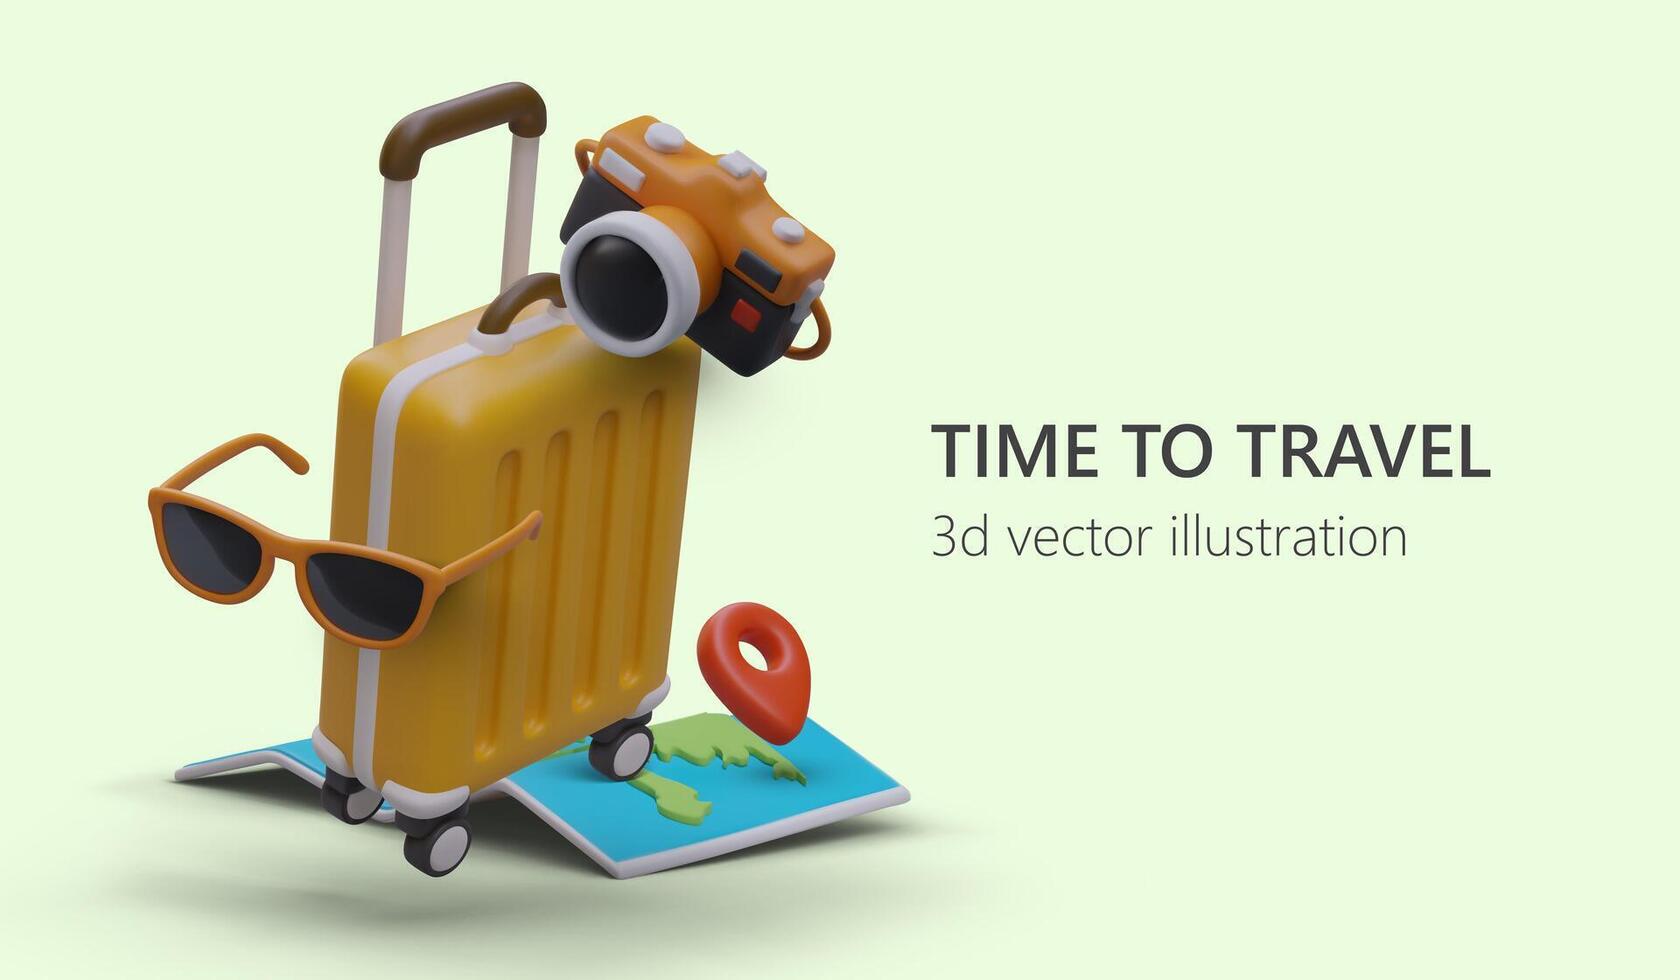 Wanderlust, time to travel. Banner with floating 3D elements vector